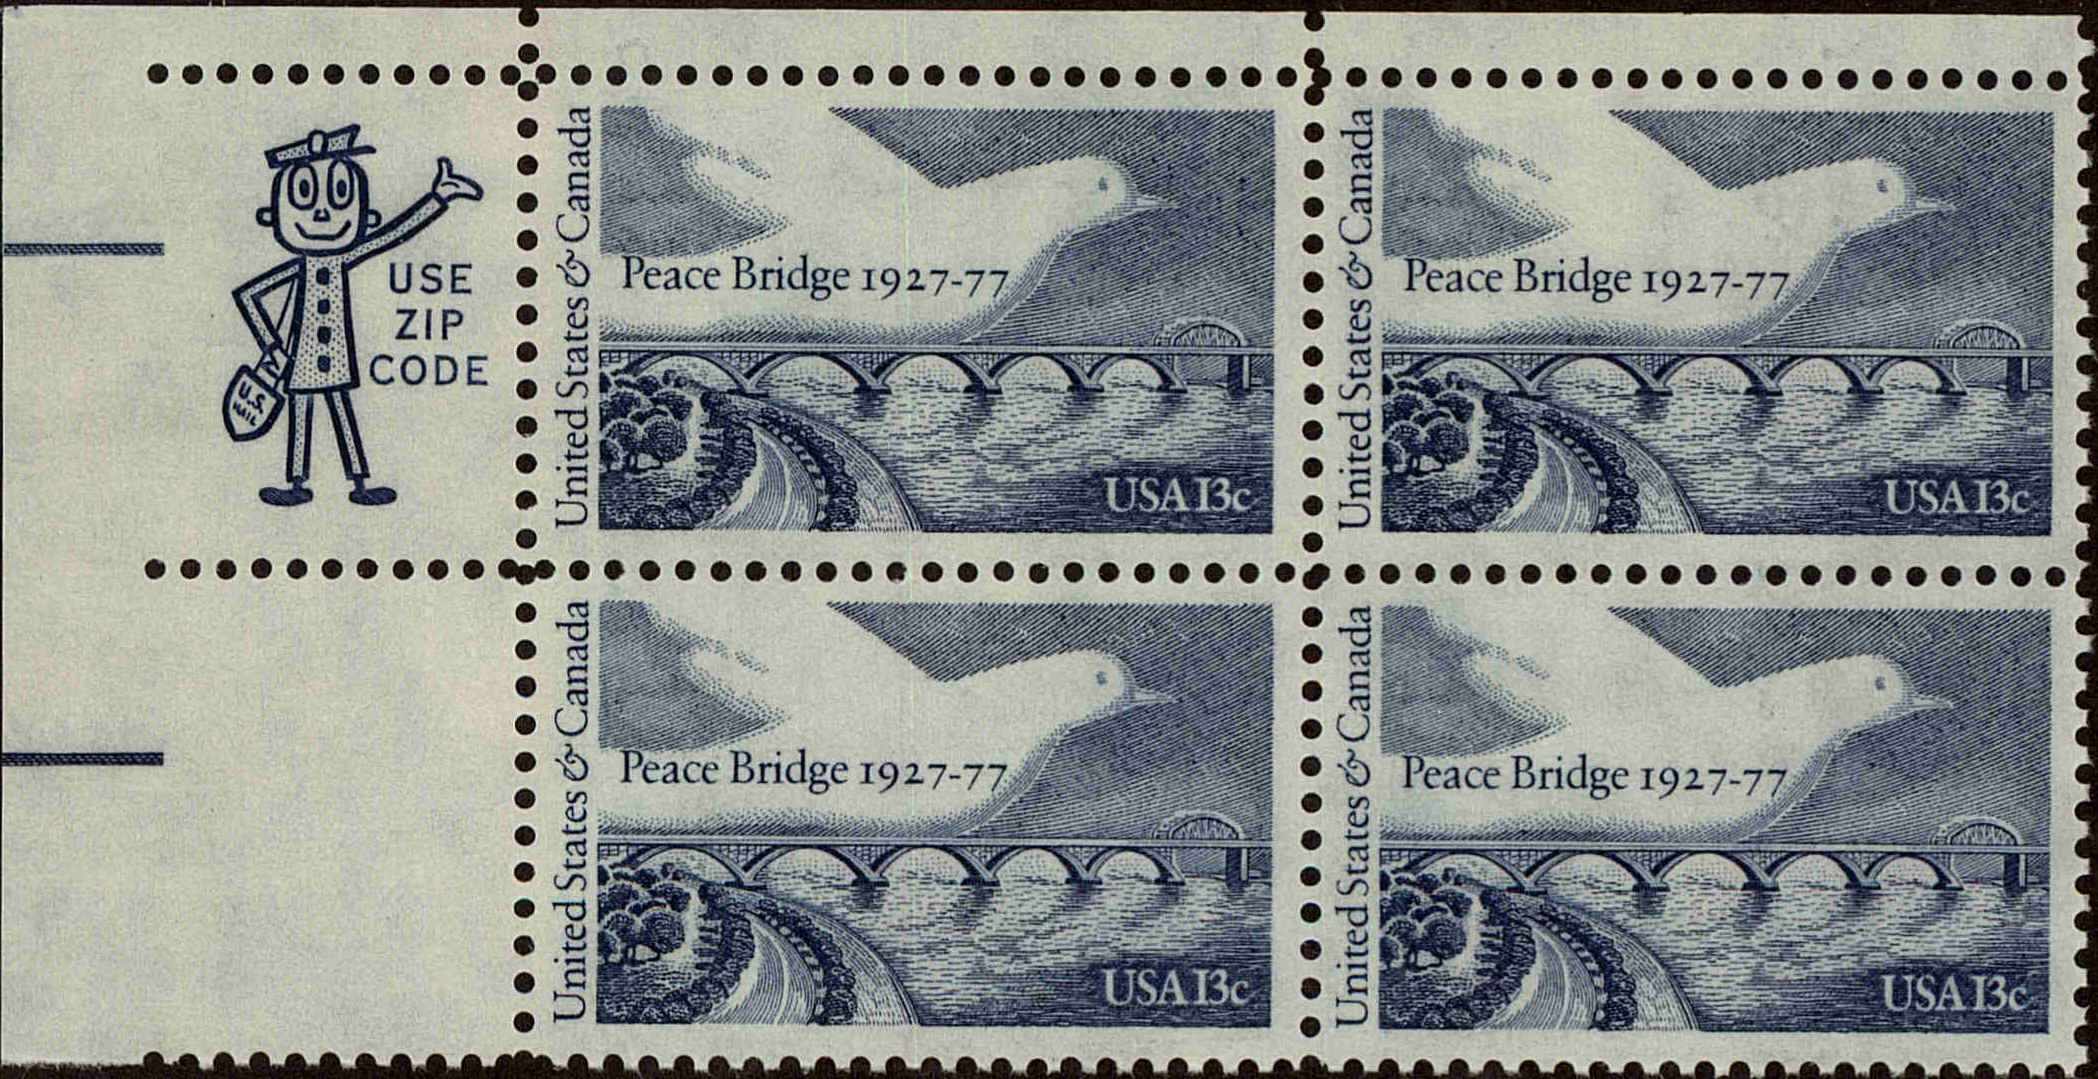 Front view of United States 1721 collectors stamp